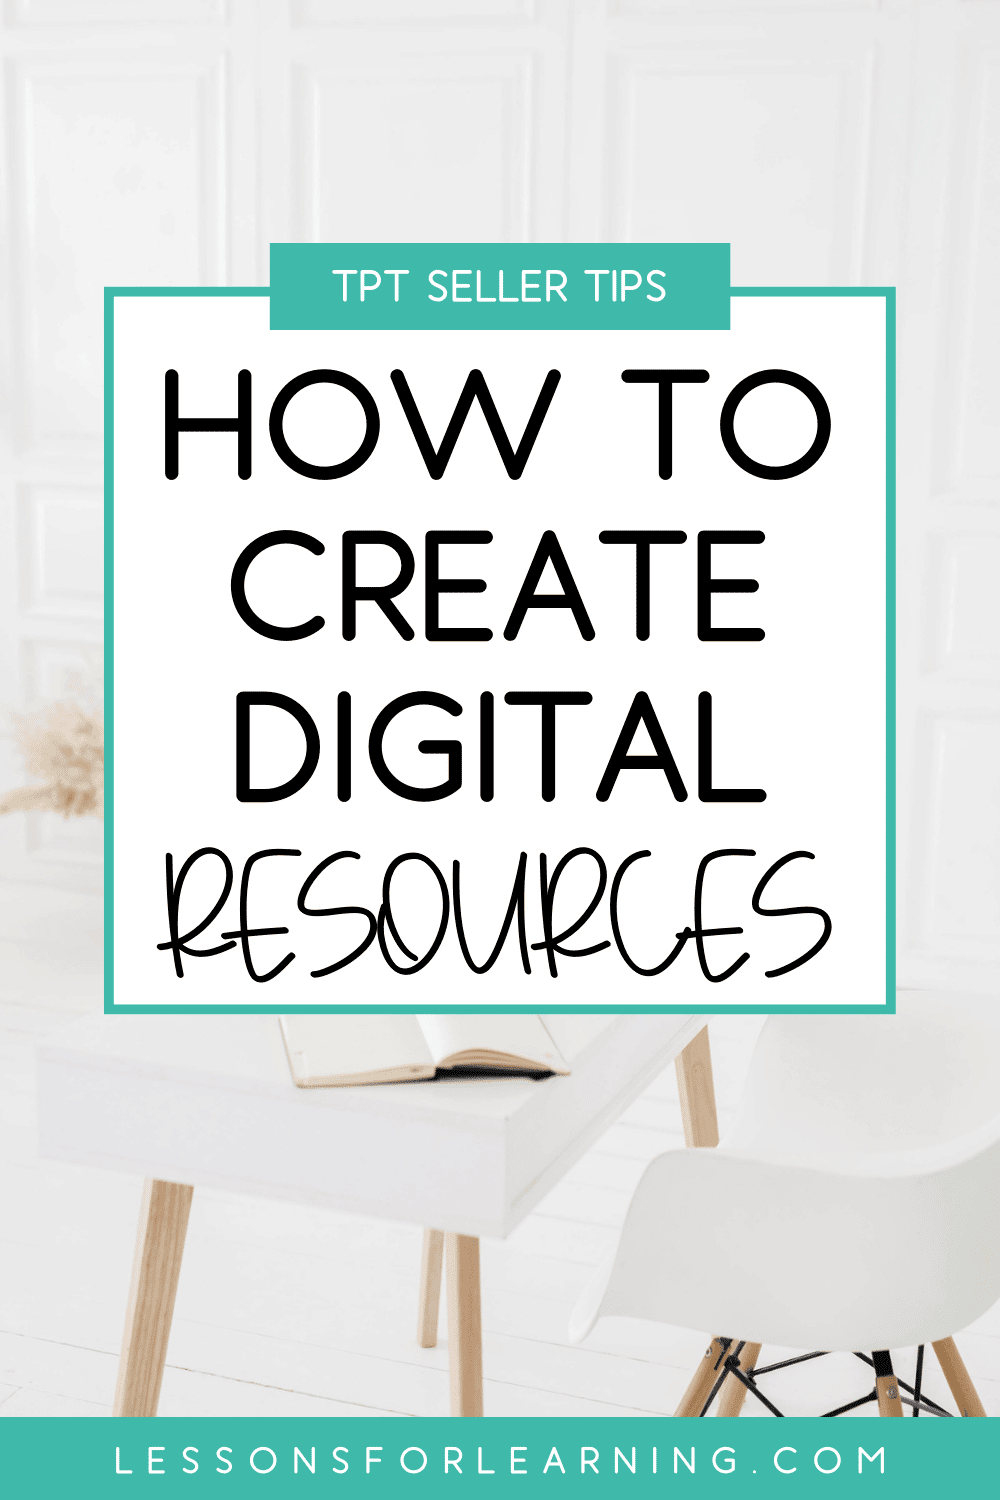 how to create digital resources-min